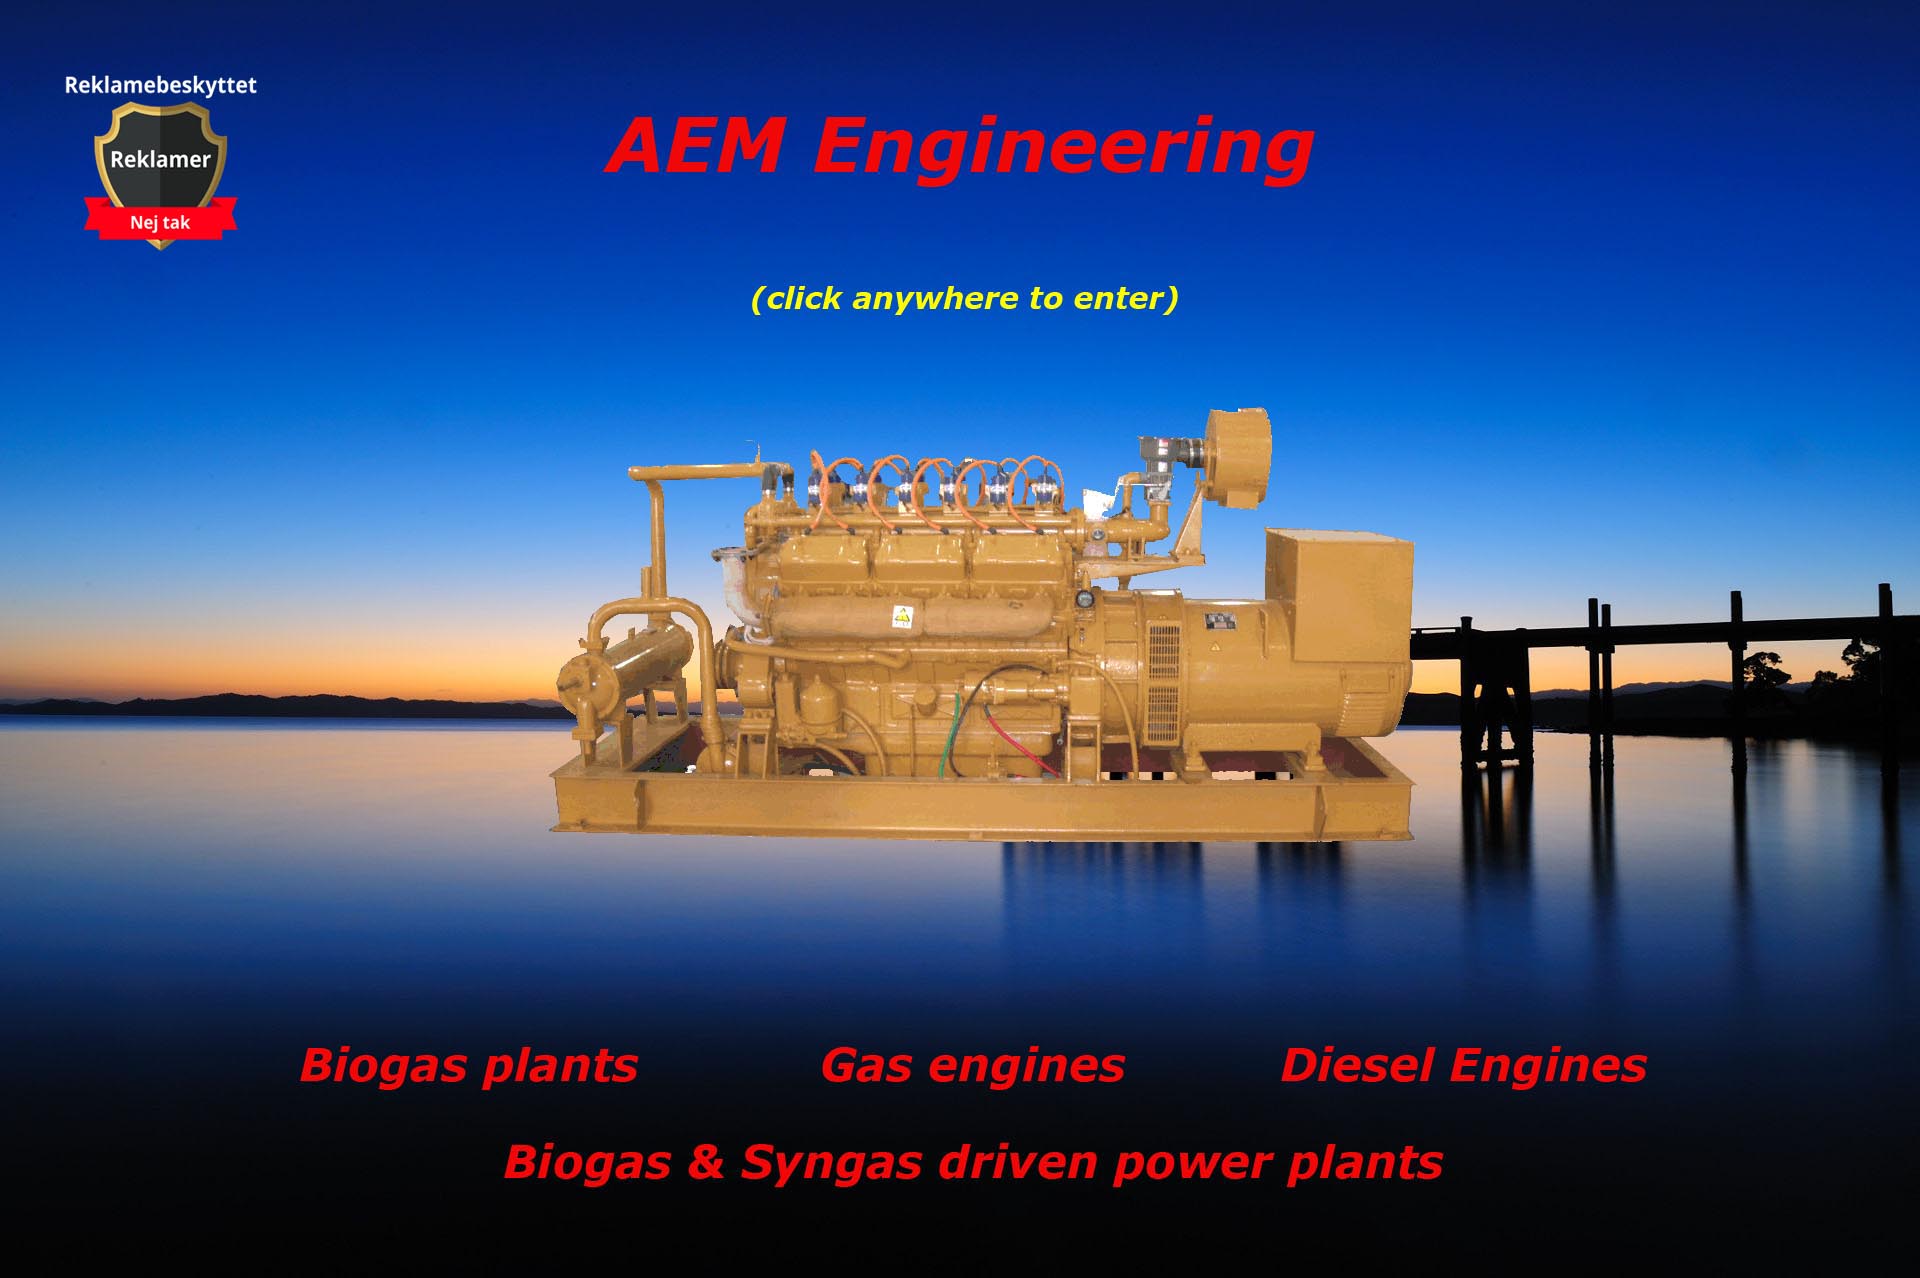 Biogas and gas engines